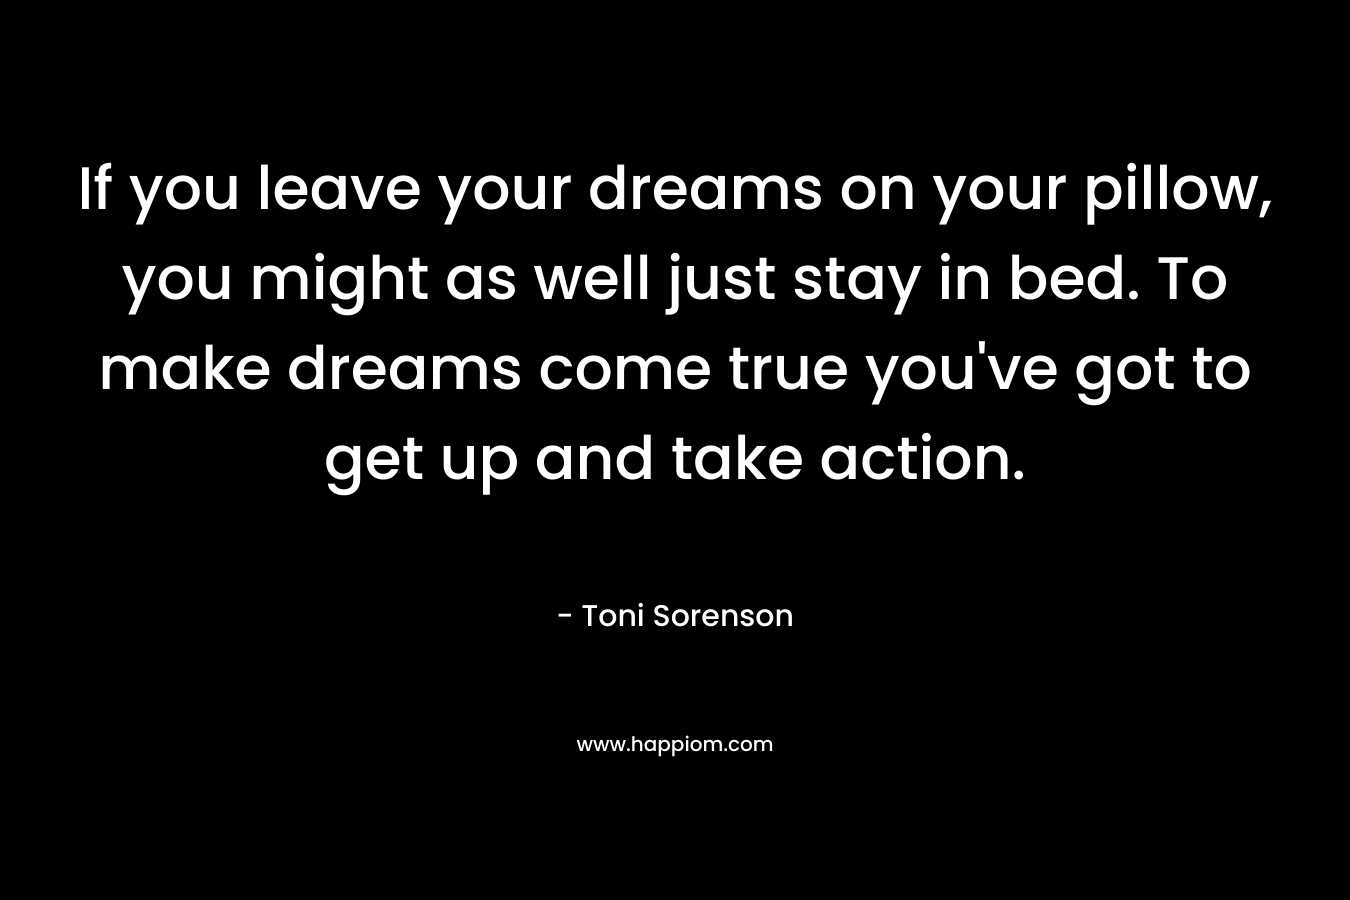 If you leave your dreams on your pillow, you might as well just stay in bed. To make dreams come true you've got to get up and take action.